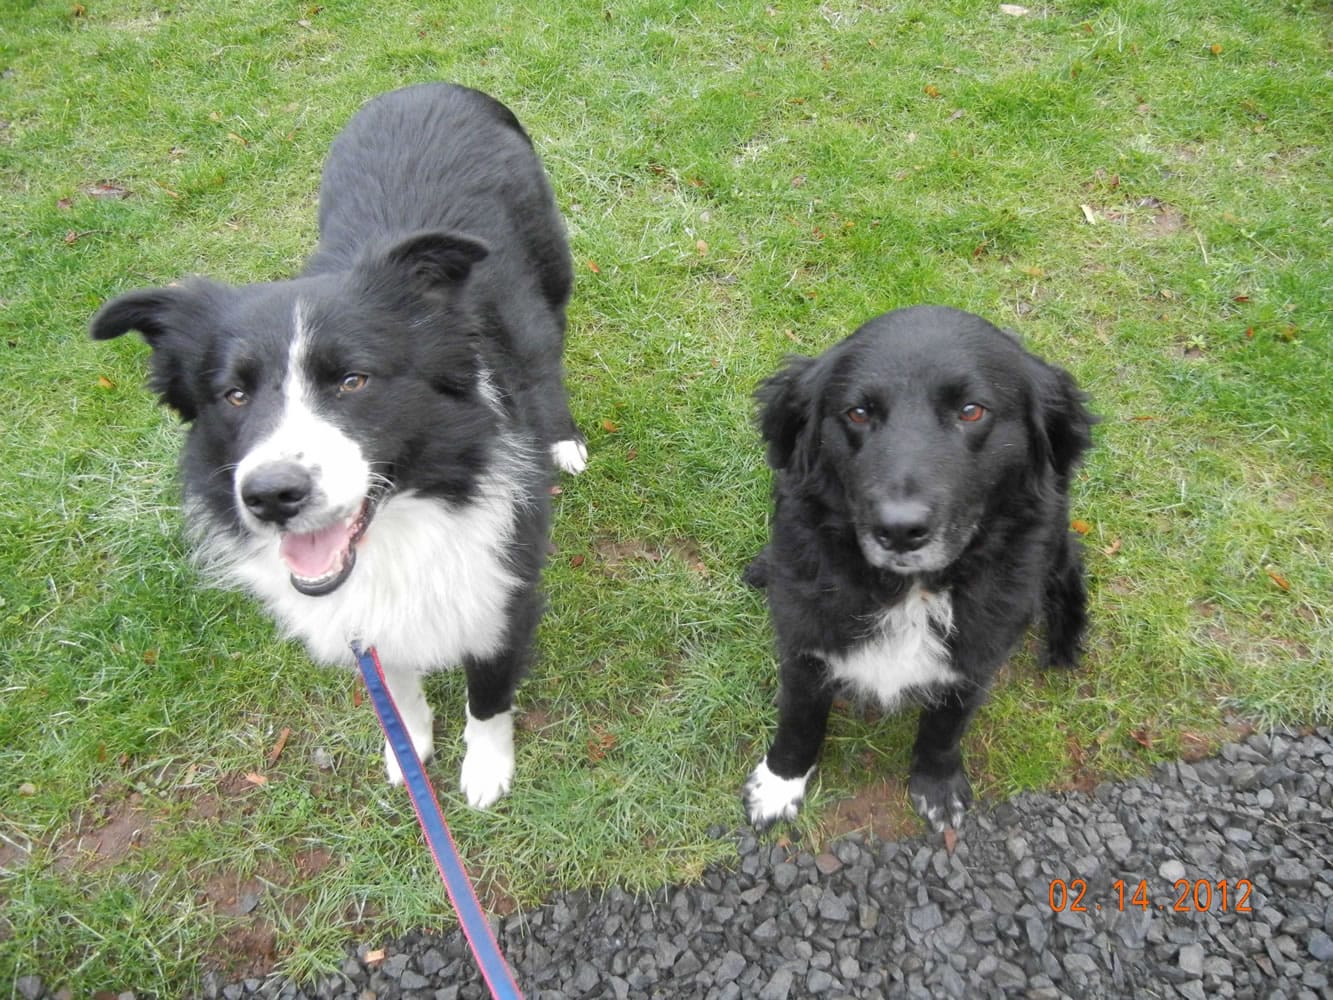 Border Collies Ben (left) and Bella (right) are happily back together under one roof. They were among the dogs that belonged to Steven Stanbary, of Washougal. Stanbary set fire to his house after killing his wife and her twin sister Dec. 7. Ben and Bella were reunited on Super Bowl Sunday after Jeff and Belinda Hickey brought Bella to the West Columbia Gorge Humane Society dog shelter to see Ben. &quot;We were just curious about him to begin with,&quot; Belinda Hickey said. &quot;We've always had dogs. We were enjoying Bella.